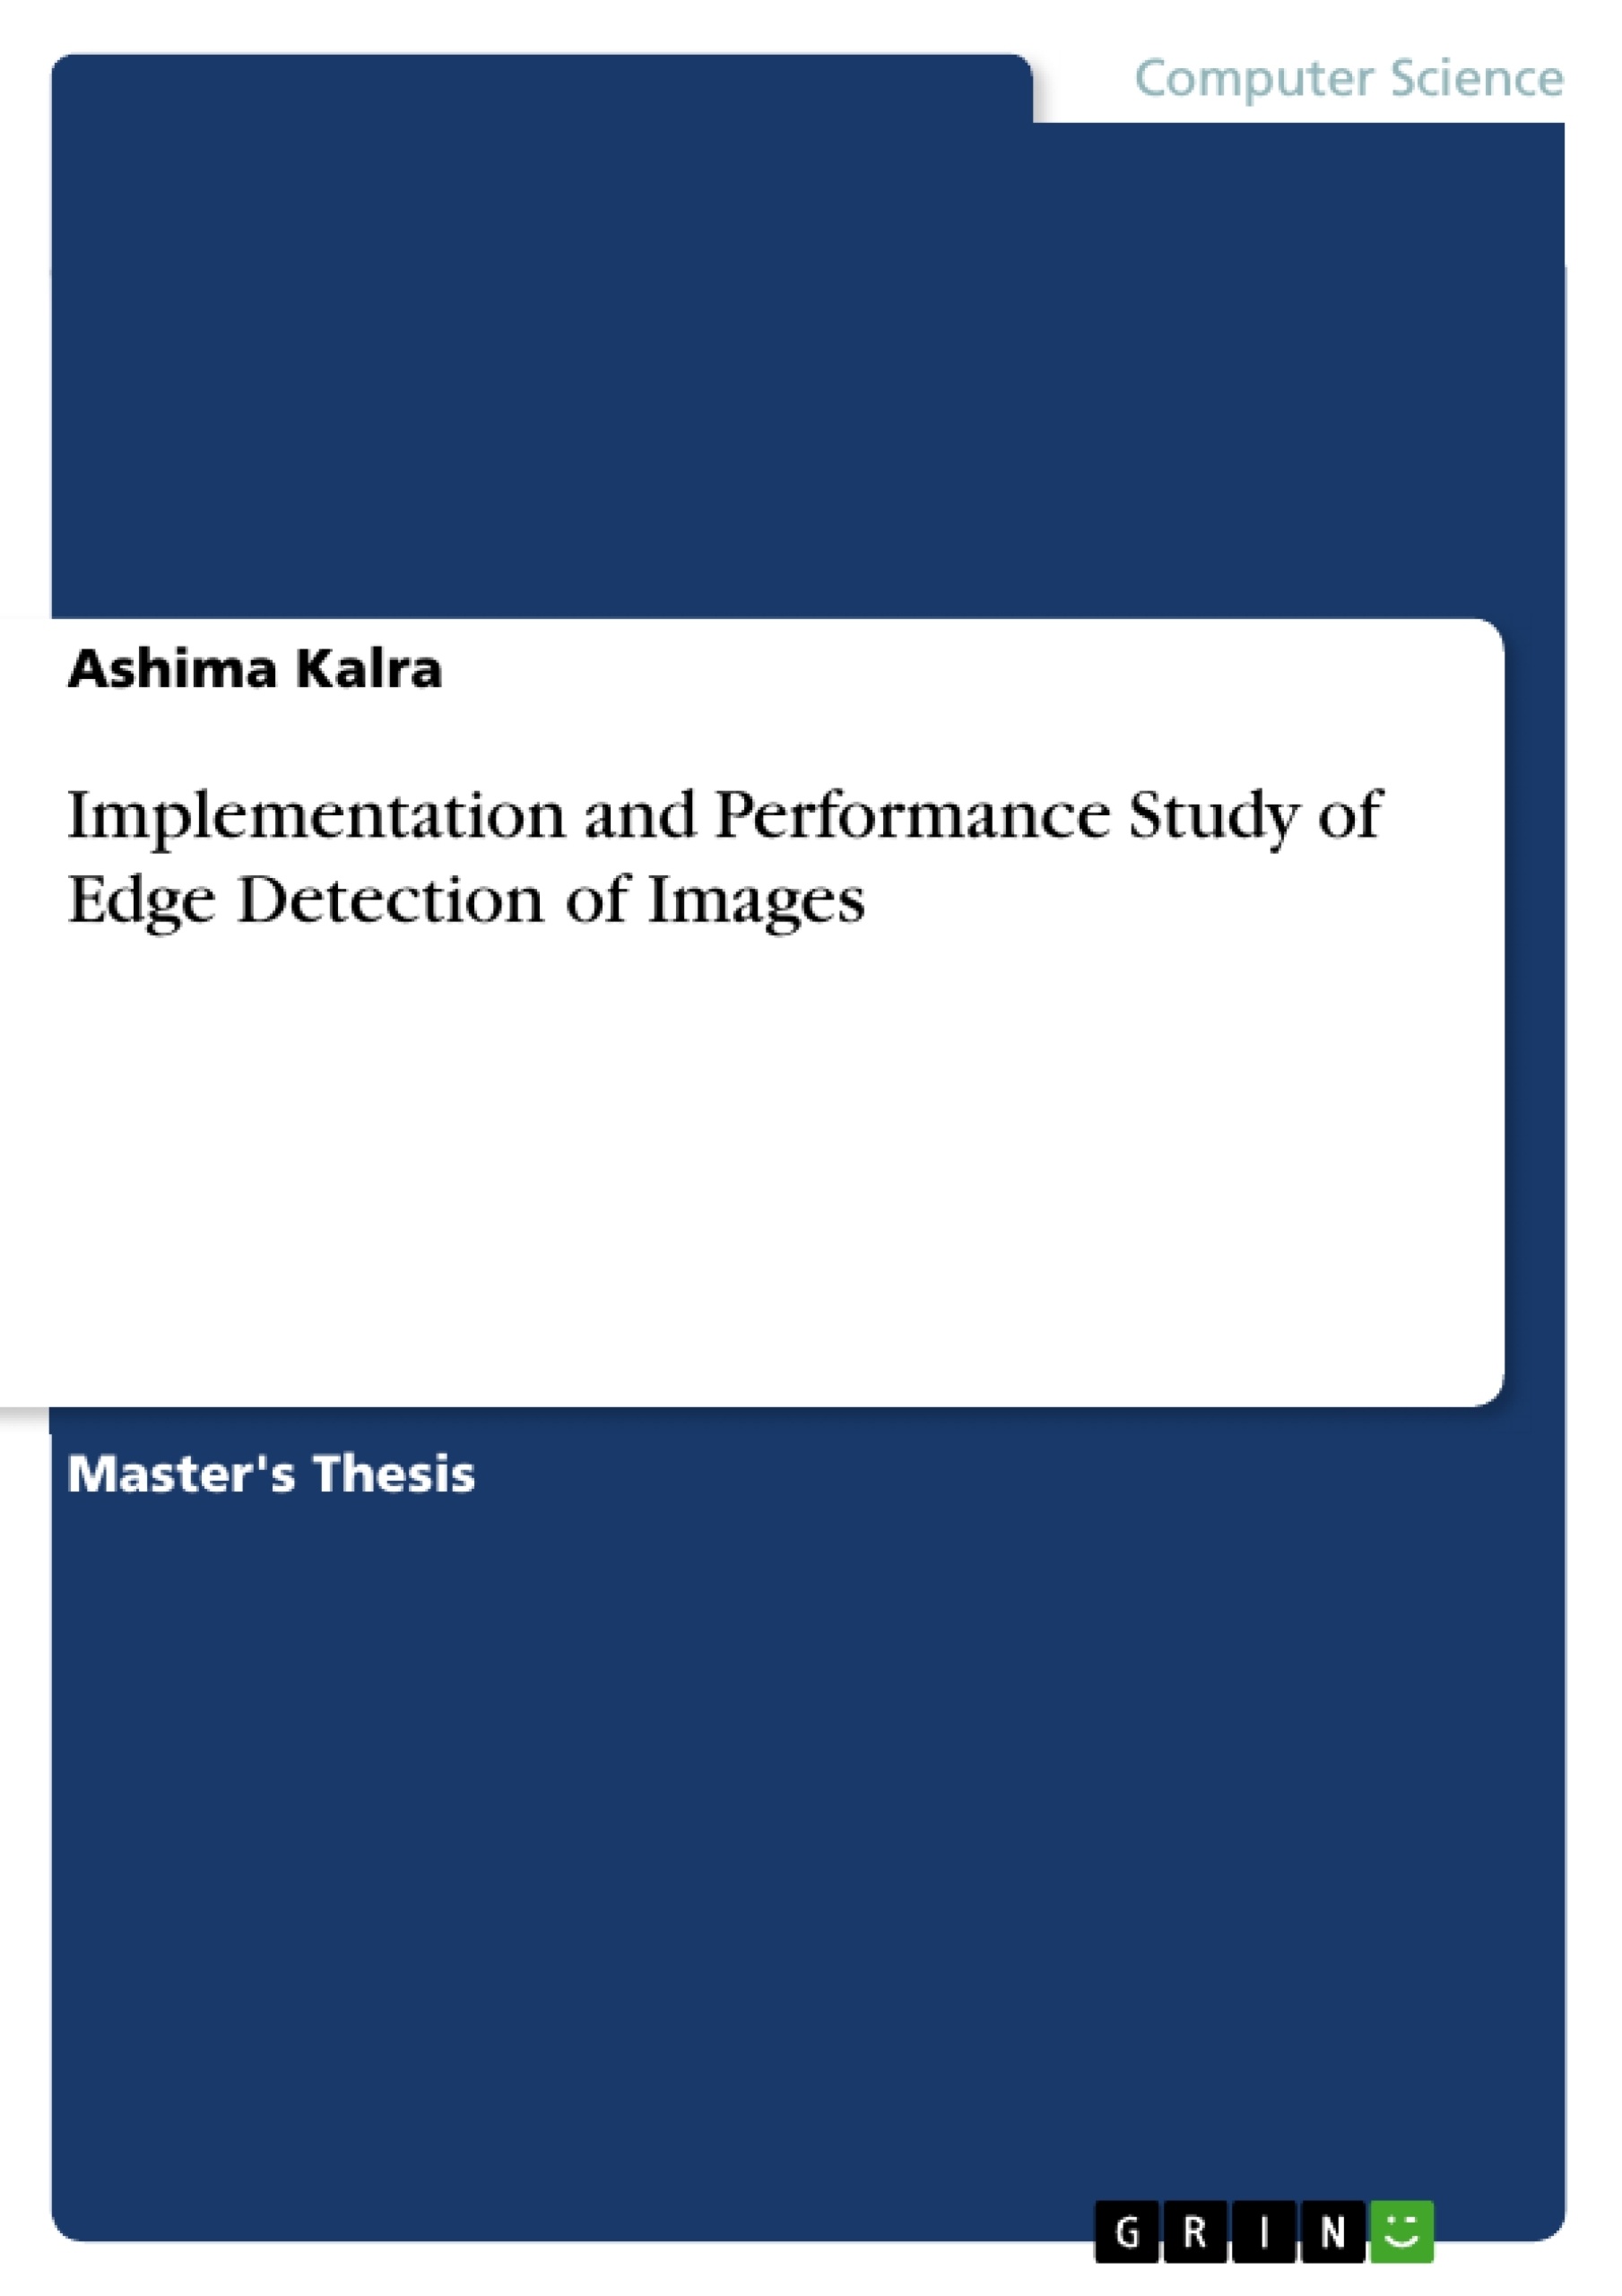 Titel: Implementation and Performance Study of Edge Detection of Images